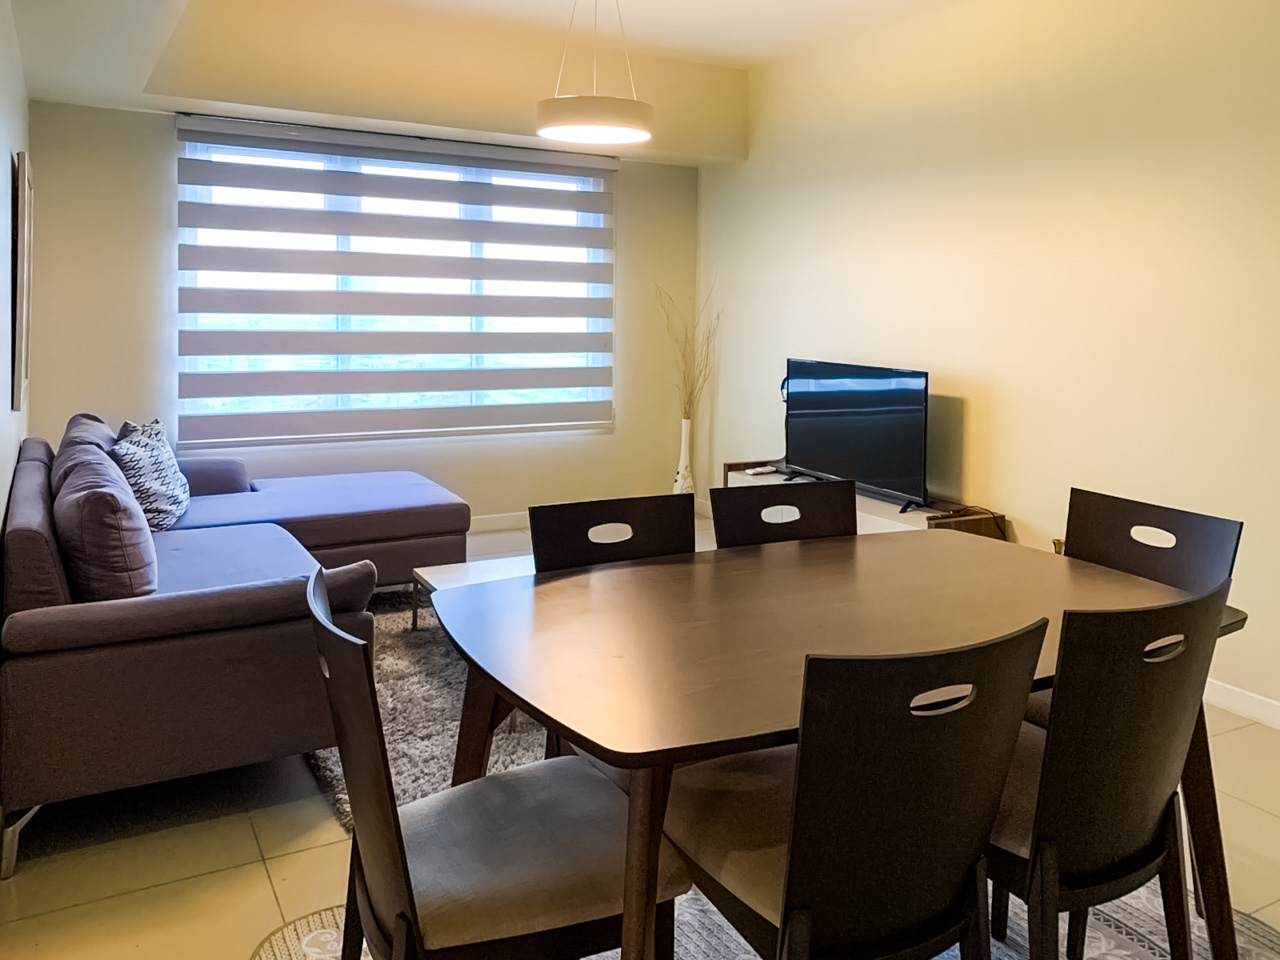 RCSP4 Furnished 2 Bedroom Condo for Rent in Cebu Business Park - 3